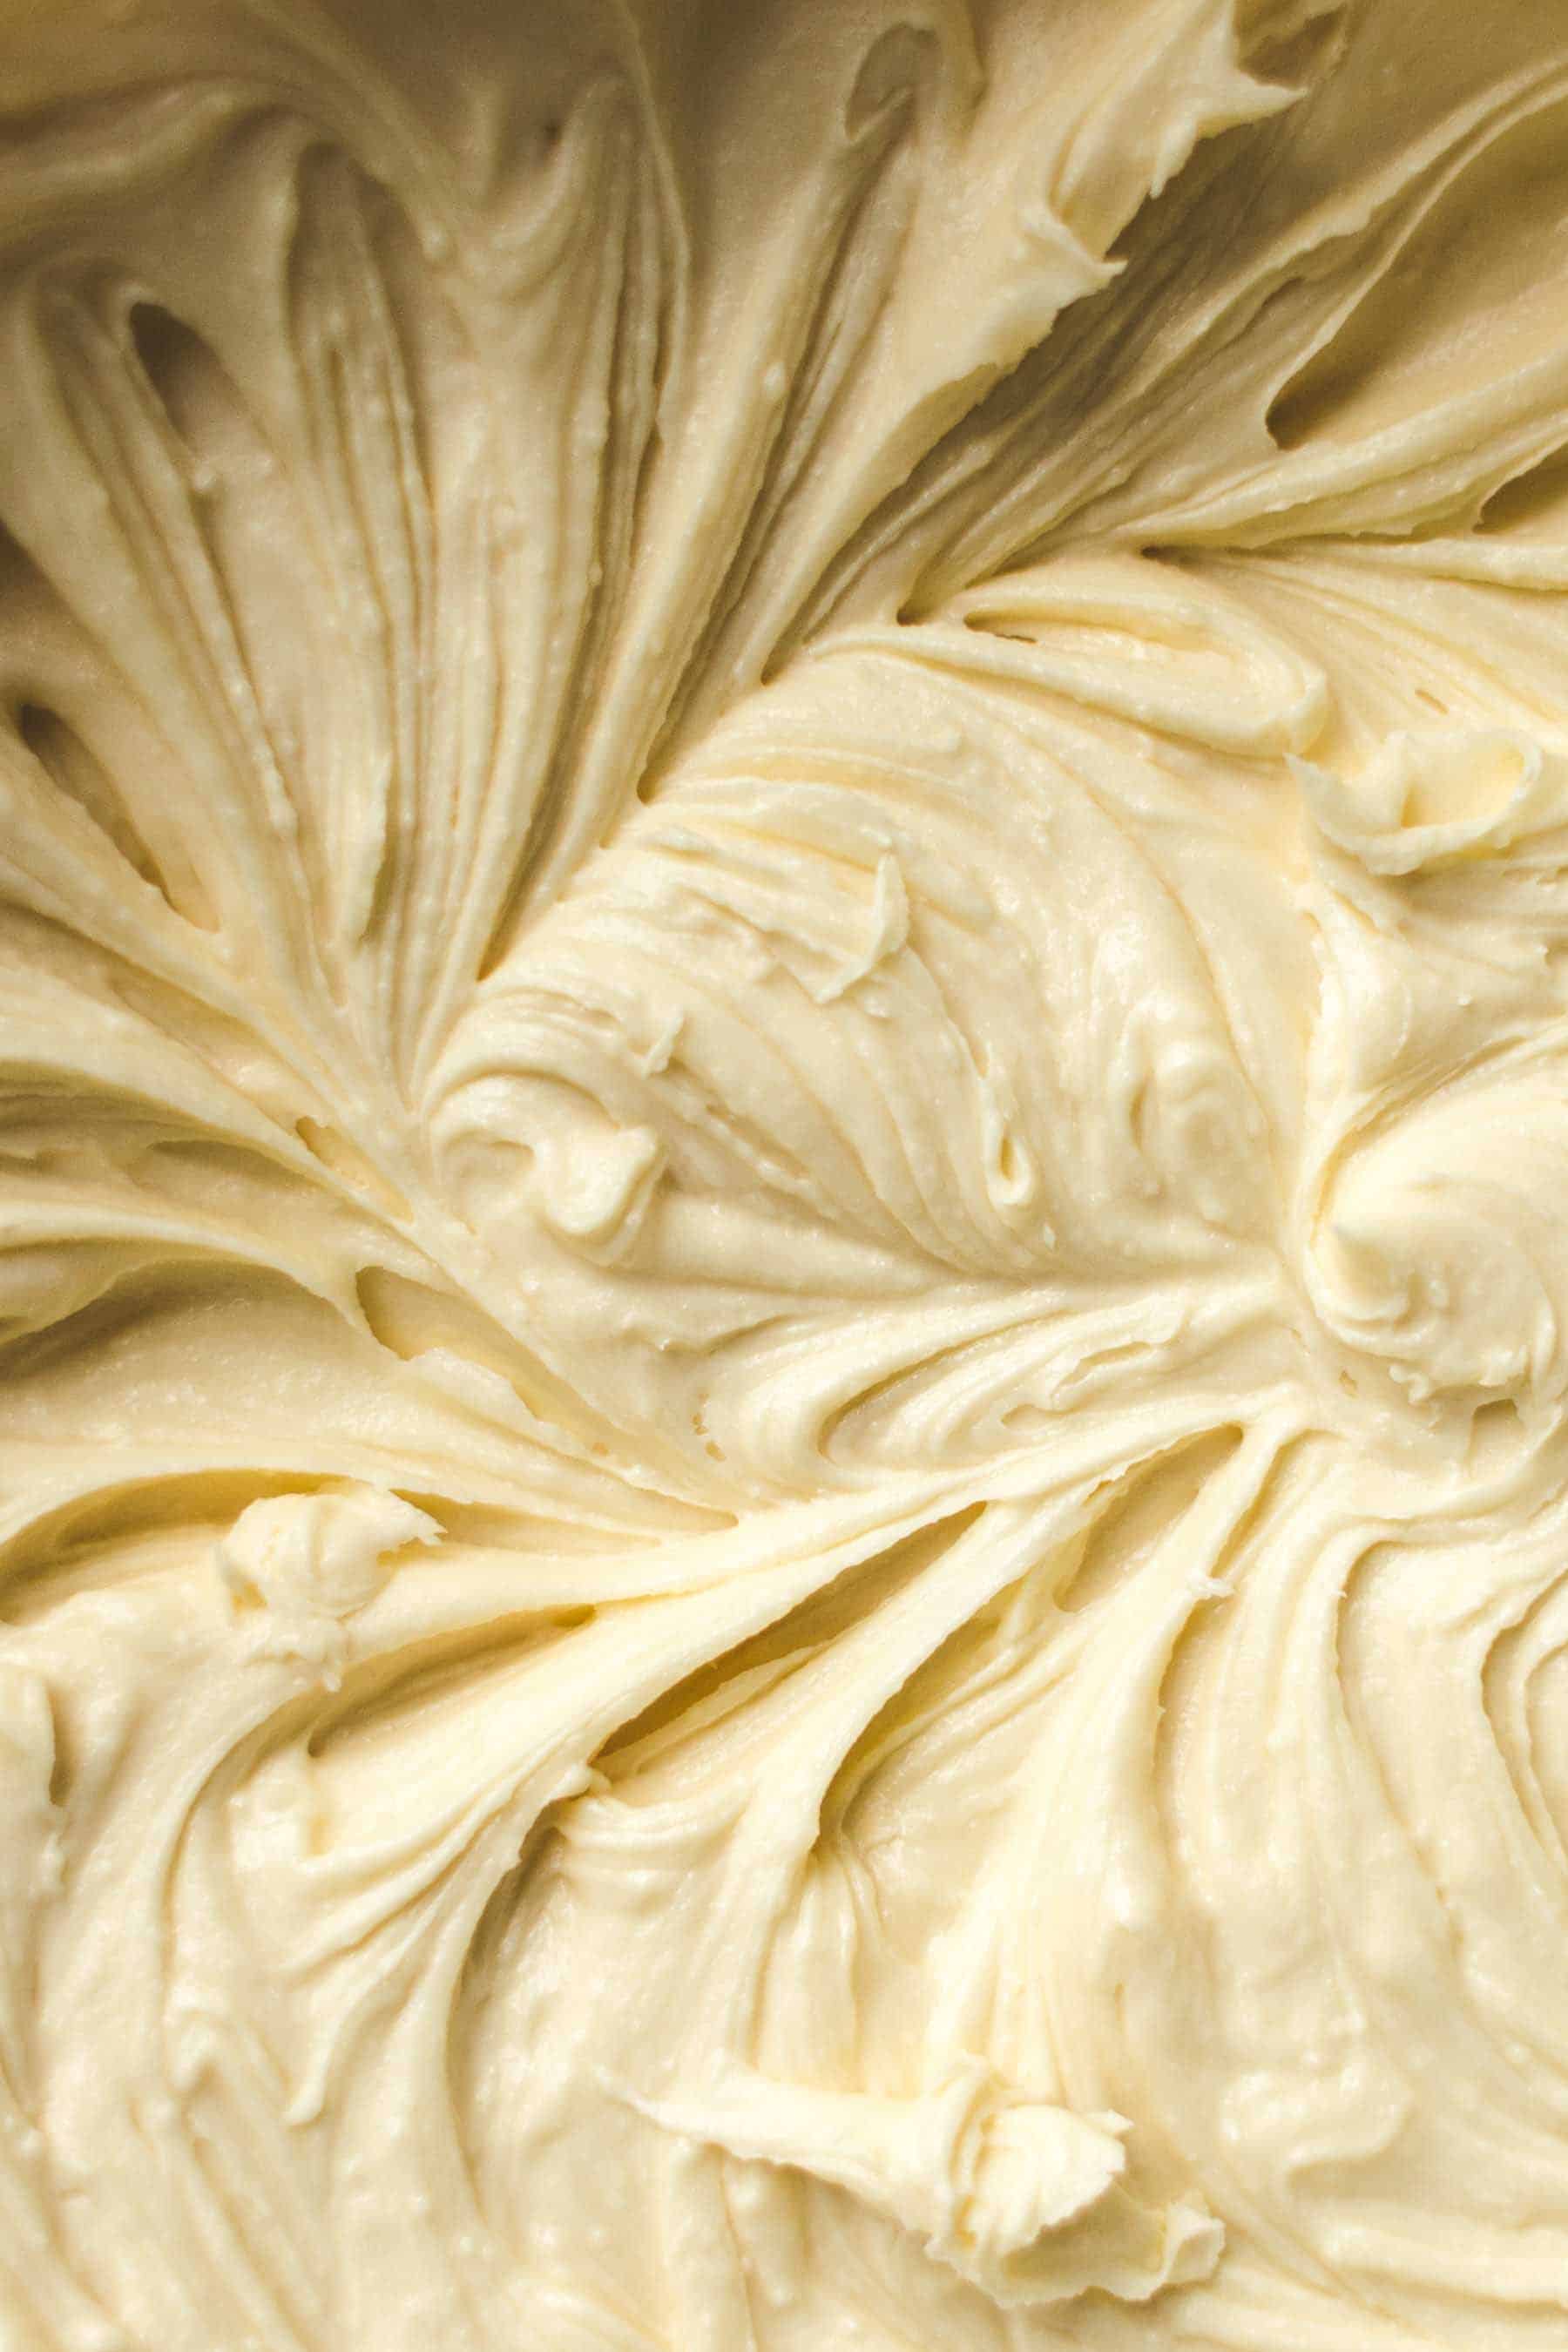 White Chocolate Frosting